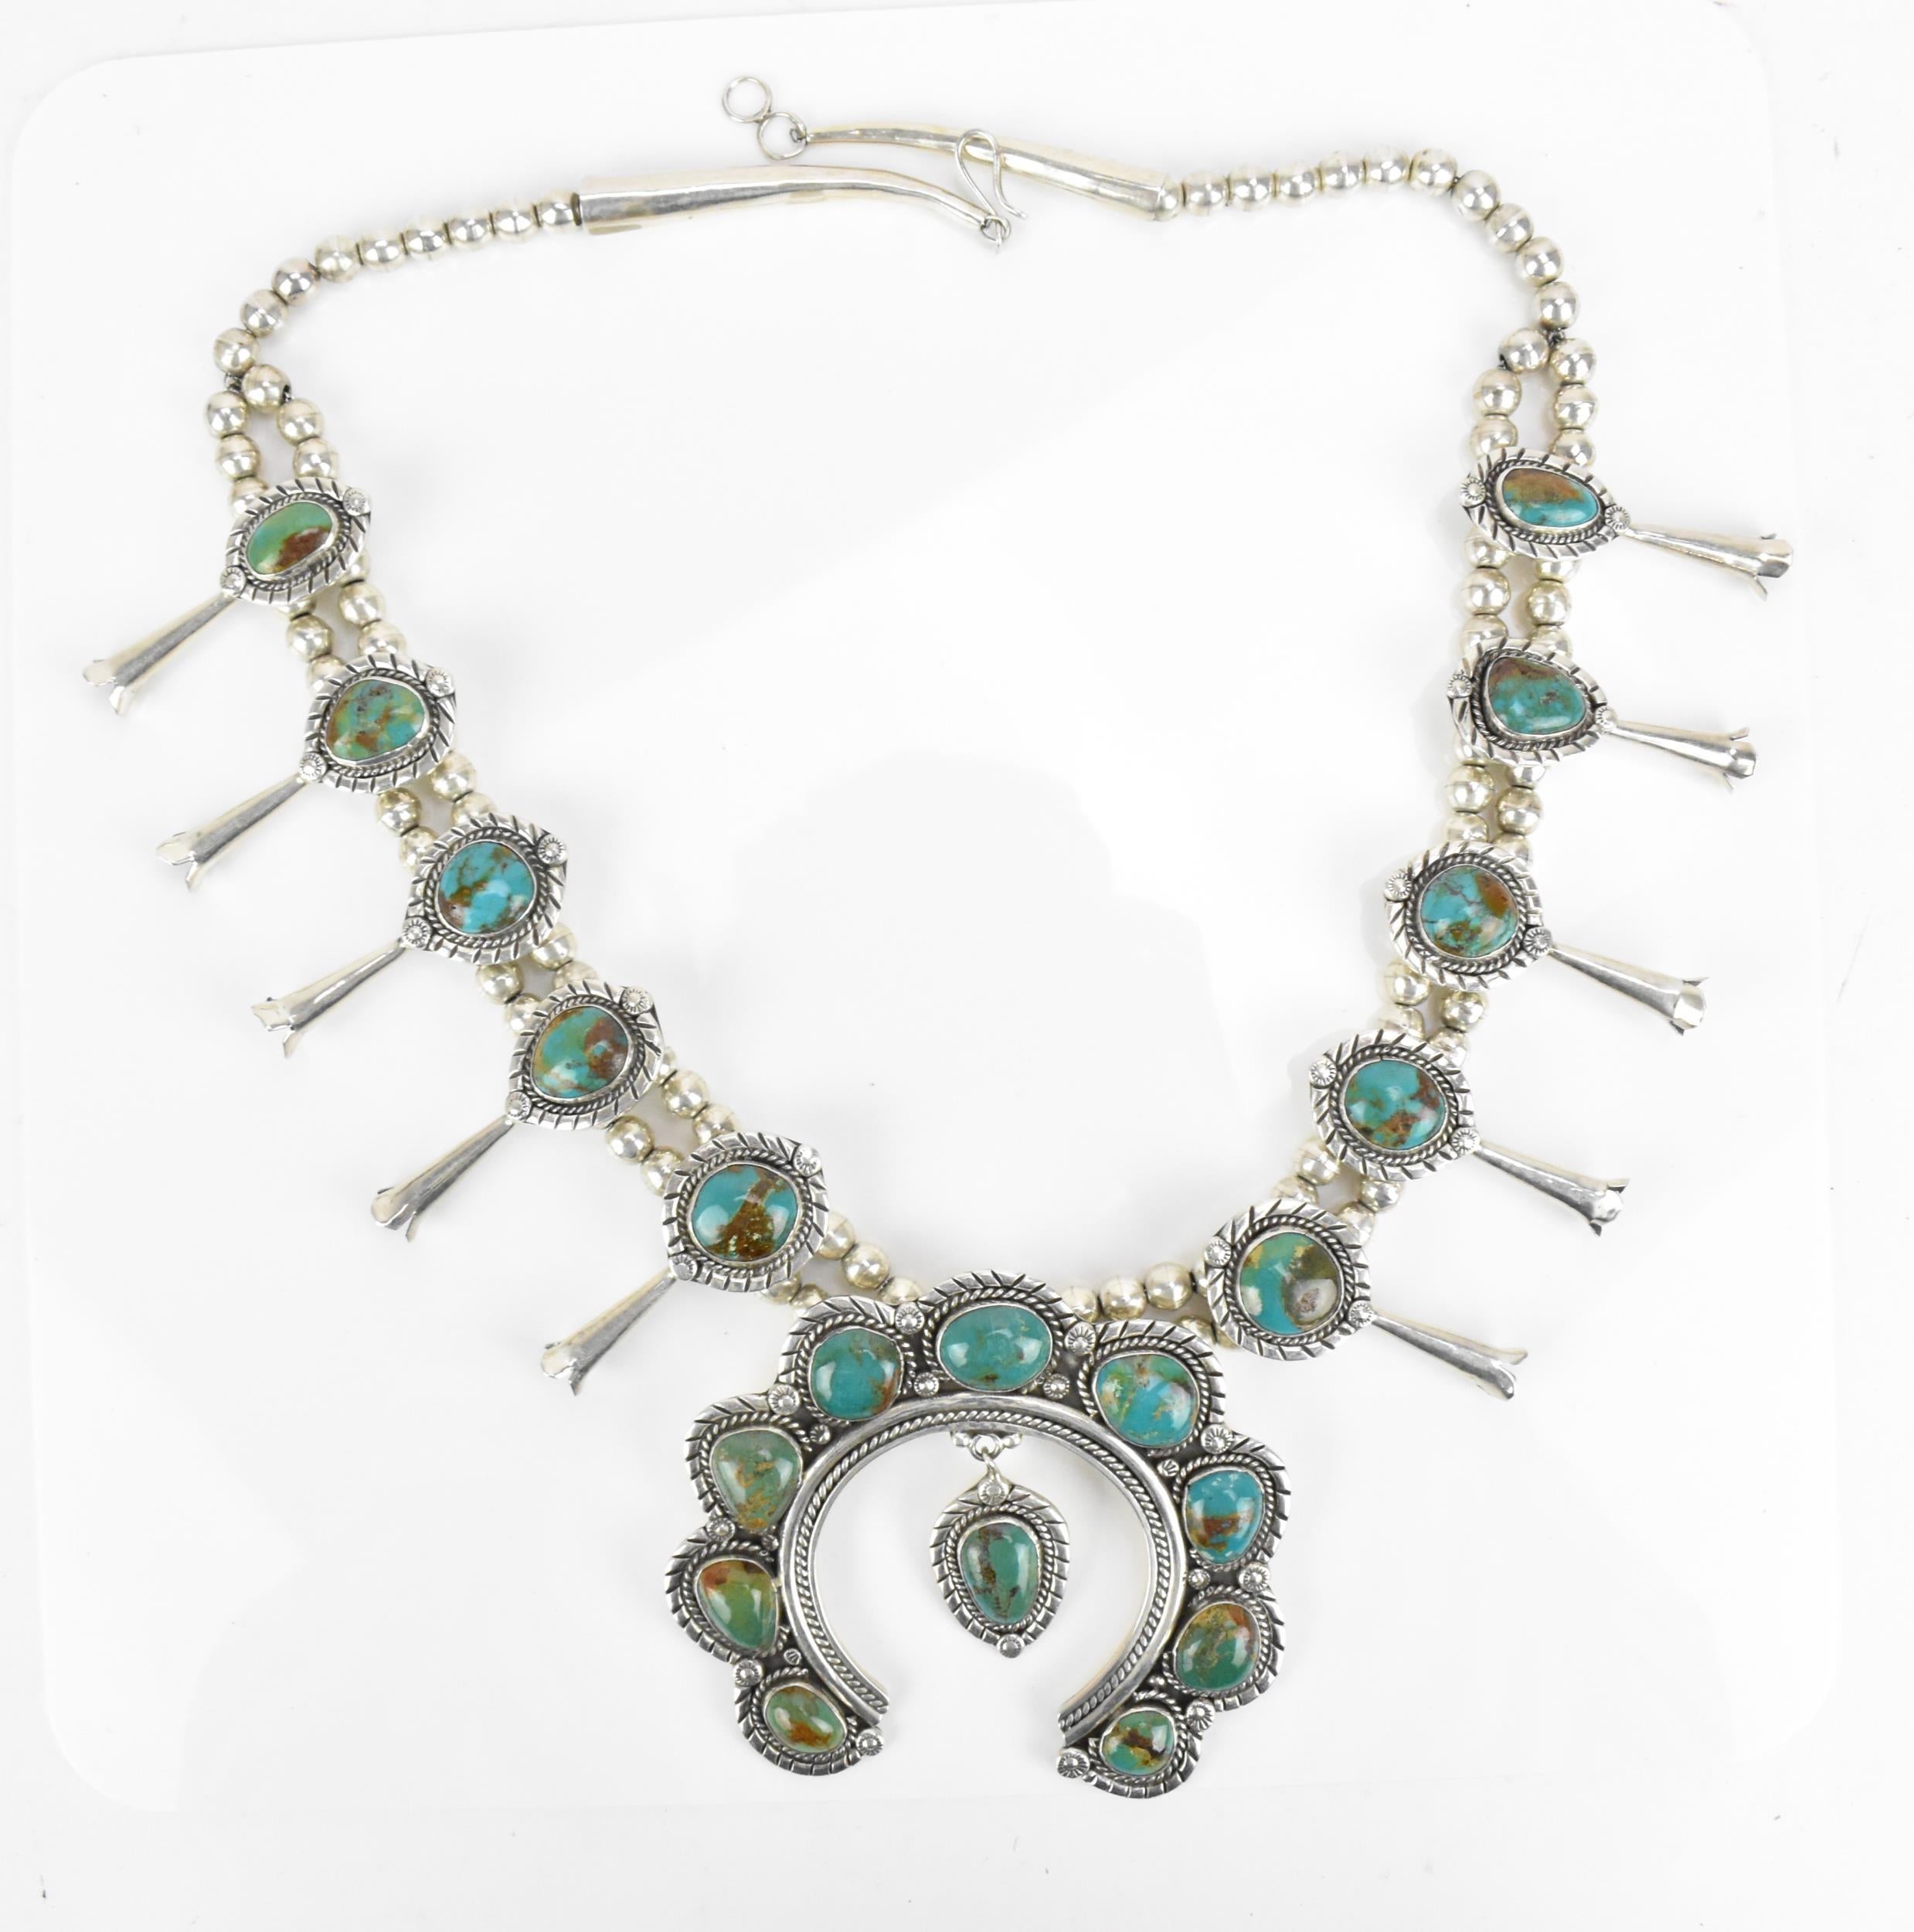 Fine quality large hand crafted Vintage Native American Navajo sterling silver and Turquoise squash blossom necklace.

In the classic Navajo Silver squash blossom design with blue green turquoise inlays

Period: 1980`s stamped sterling with makers